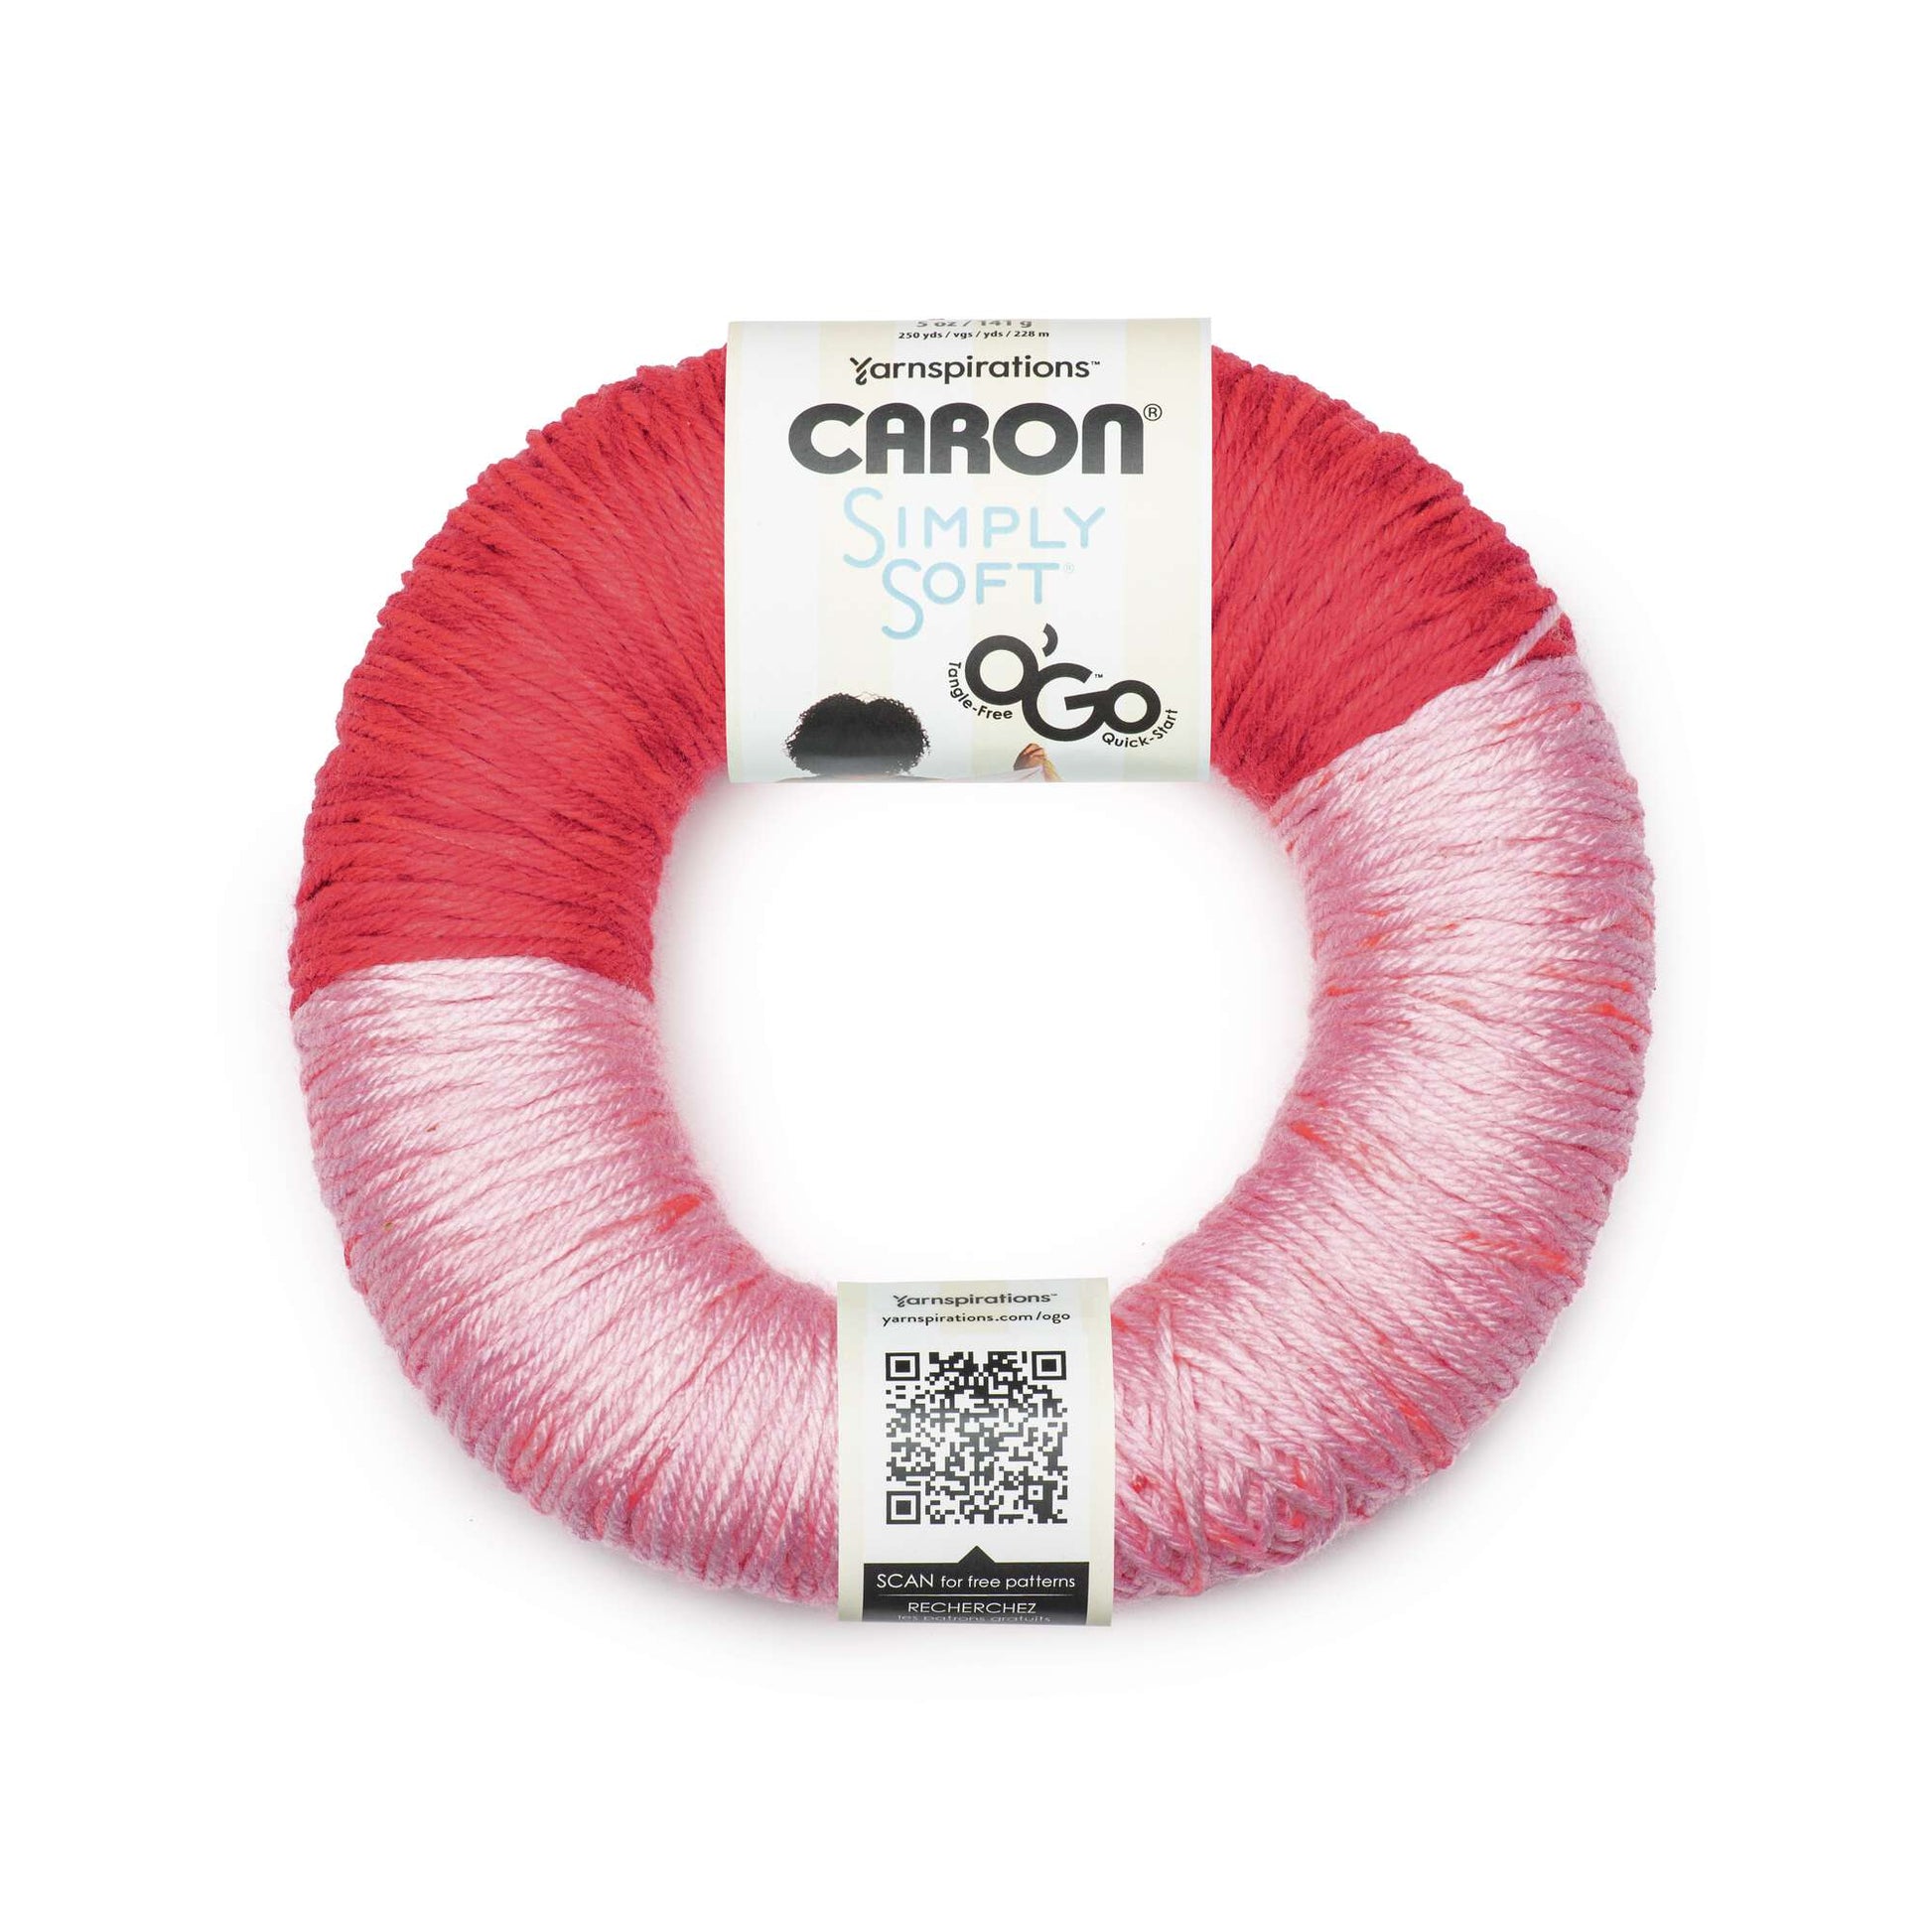 Caron Simply Soft O'Go (141g/5oz) - Clearance Shades* Harvest Red Soft Pink